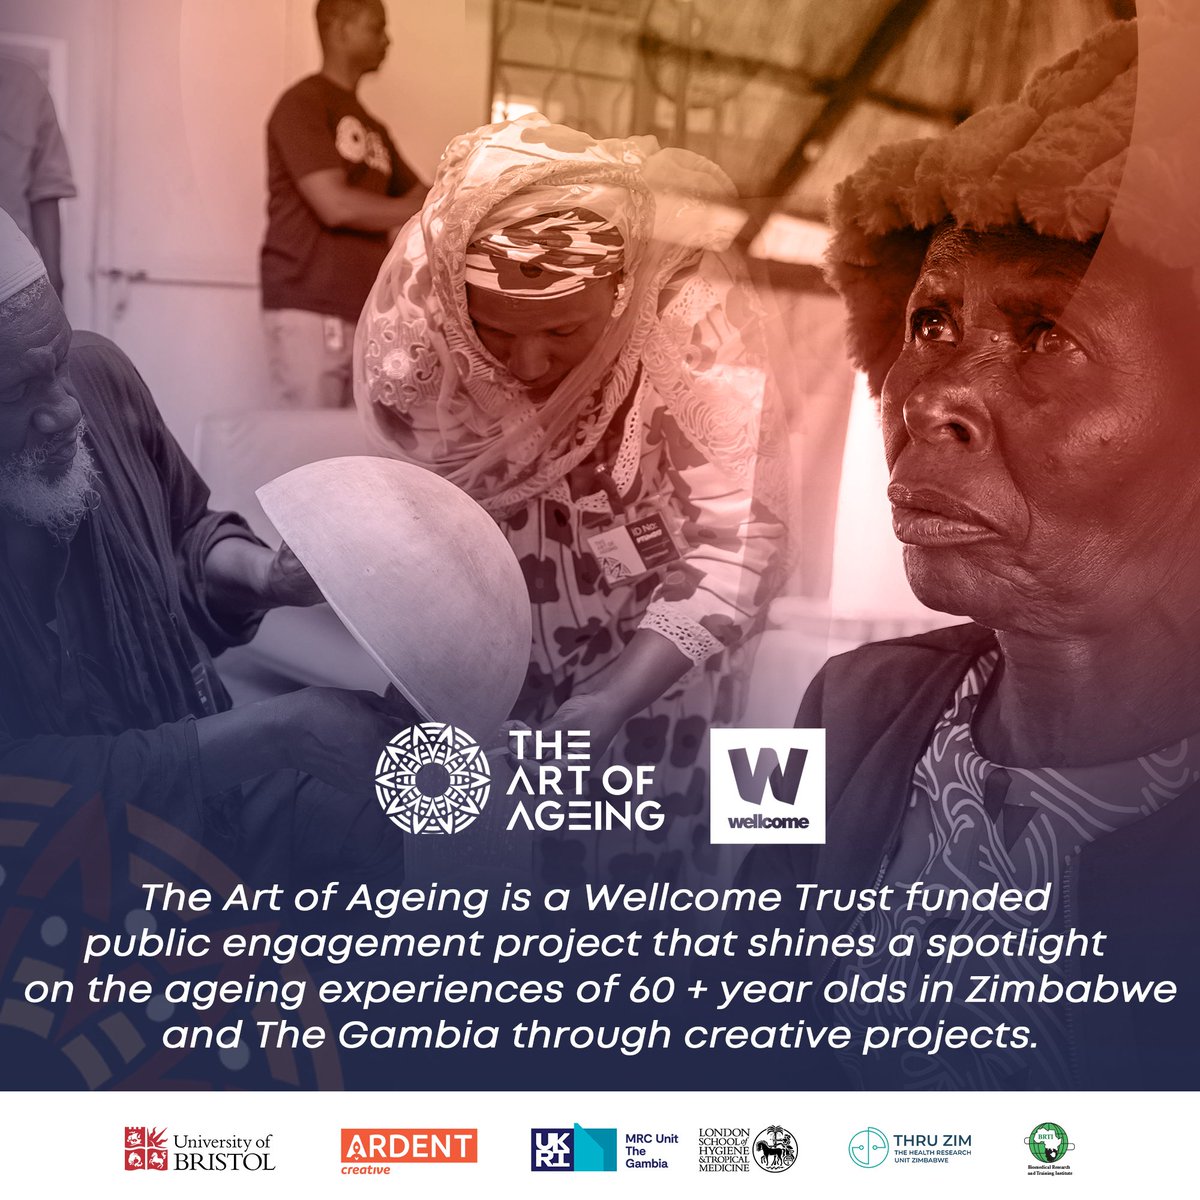 🌟✨ As the Art of Ageing Competition entries pour in from the Gambia and the competition finalists in Zimbabwe work on their final projects, 

We are reminded that age is an opportunity for endless creativity and self-expression ♻️✨️

#ArtOfAgeing #healthyageing #Creativity